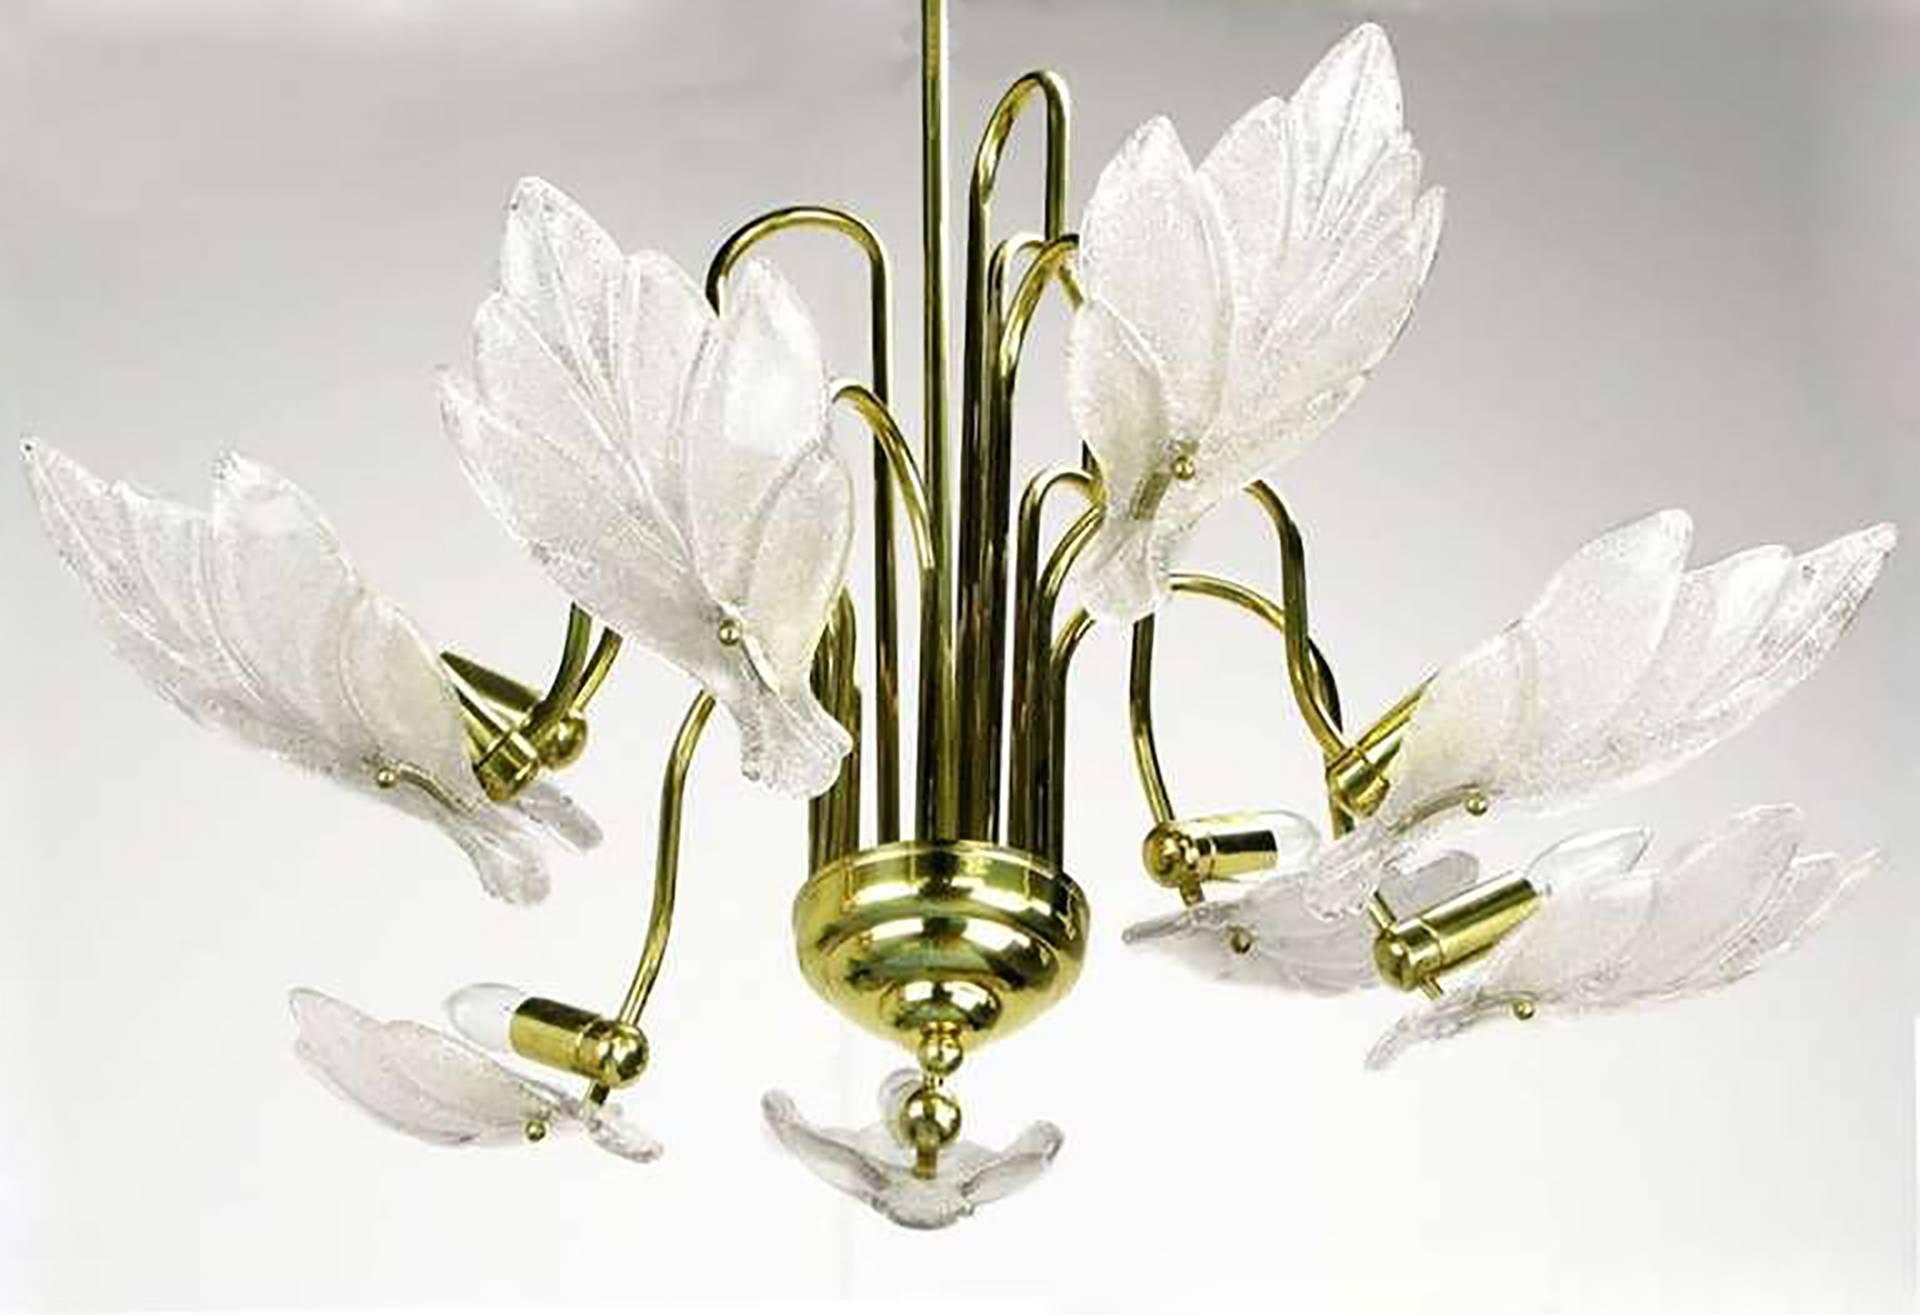 Elegant nine-arm Murano glass leaf shade chandelier in the style of Barovier & Toso. Each leaf is opaque bubble glass with gold leaf inclusions. 360 possible watts of illumination. Matching sconces available. Believed to be of Italian origin.